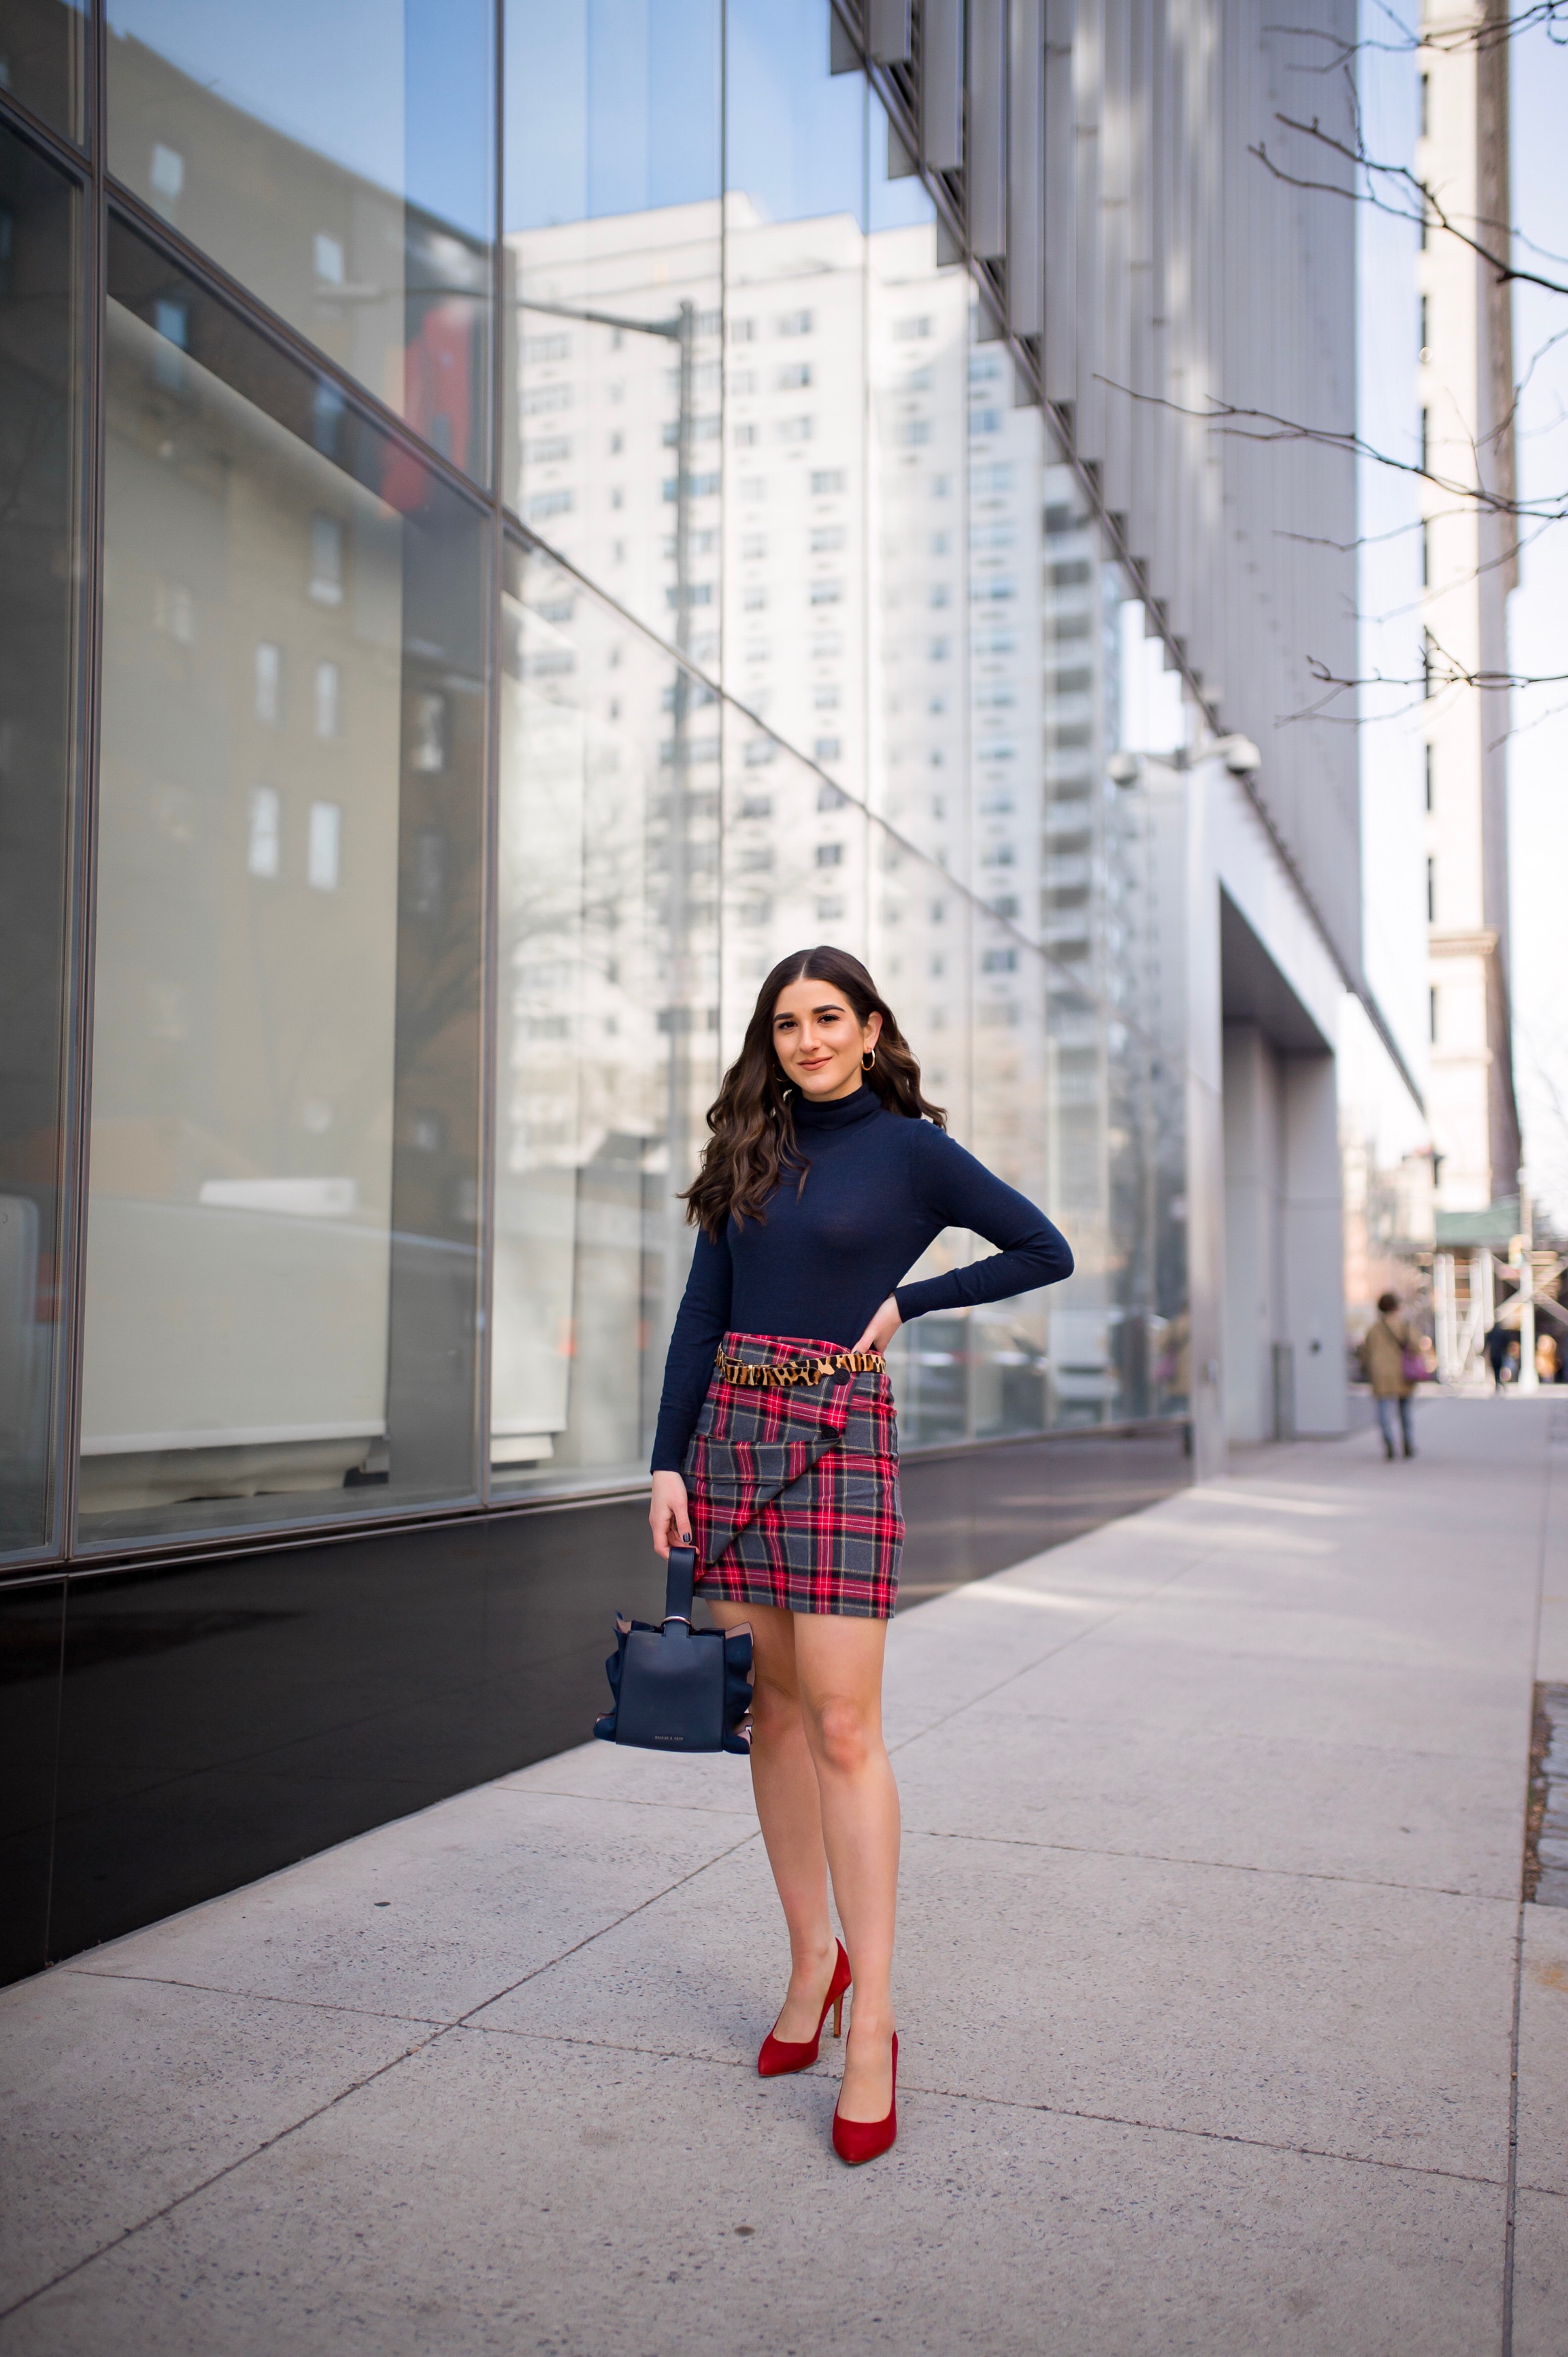 How NYFW Changed From My 1st To 12th Season Plaid Skirt Red Heels Esther Santer Fashion Blog NYC Street Style Blogger Outfit OOTD Trendy Shopping Navy Turtleneck Hair Goals Wear Winter Fall Shop Jcrew H&M Banana Republic Leopard Belt Accessories Bag .jpg